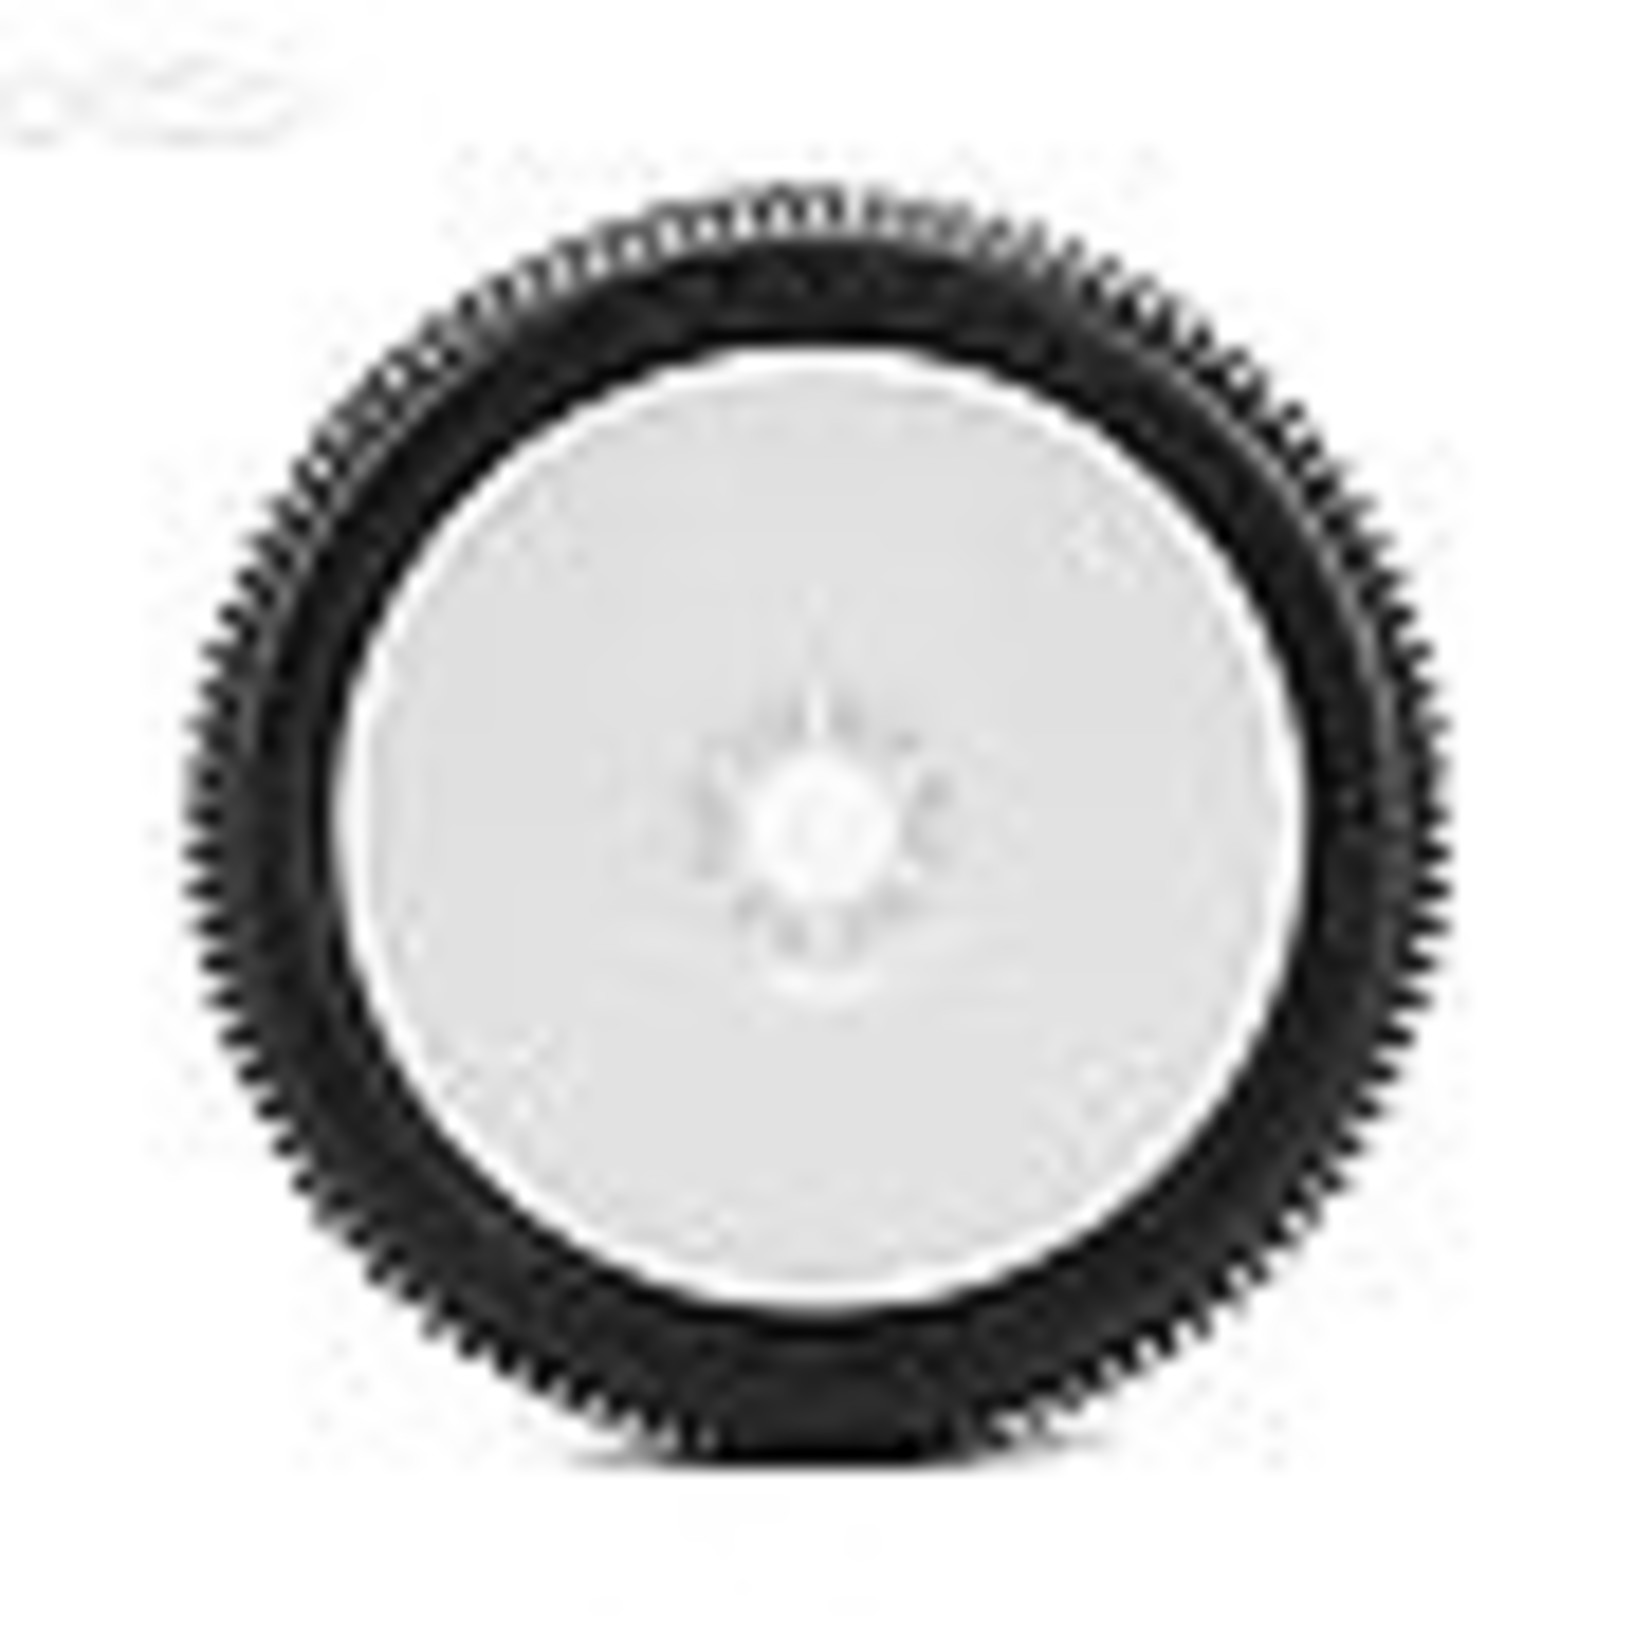 Jetko Tires Marco 1/8 Buggy Tires Mounted on White Dish Rims, Super Soft (2)